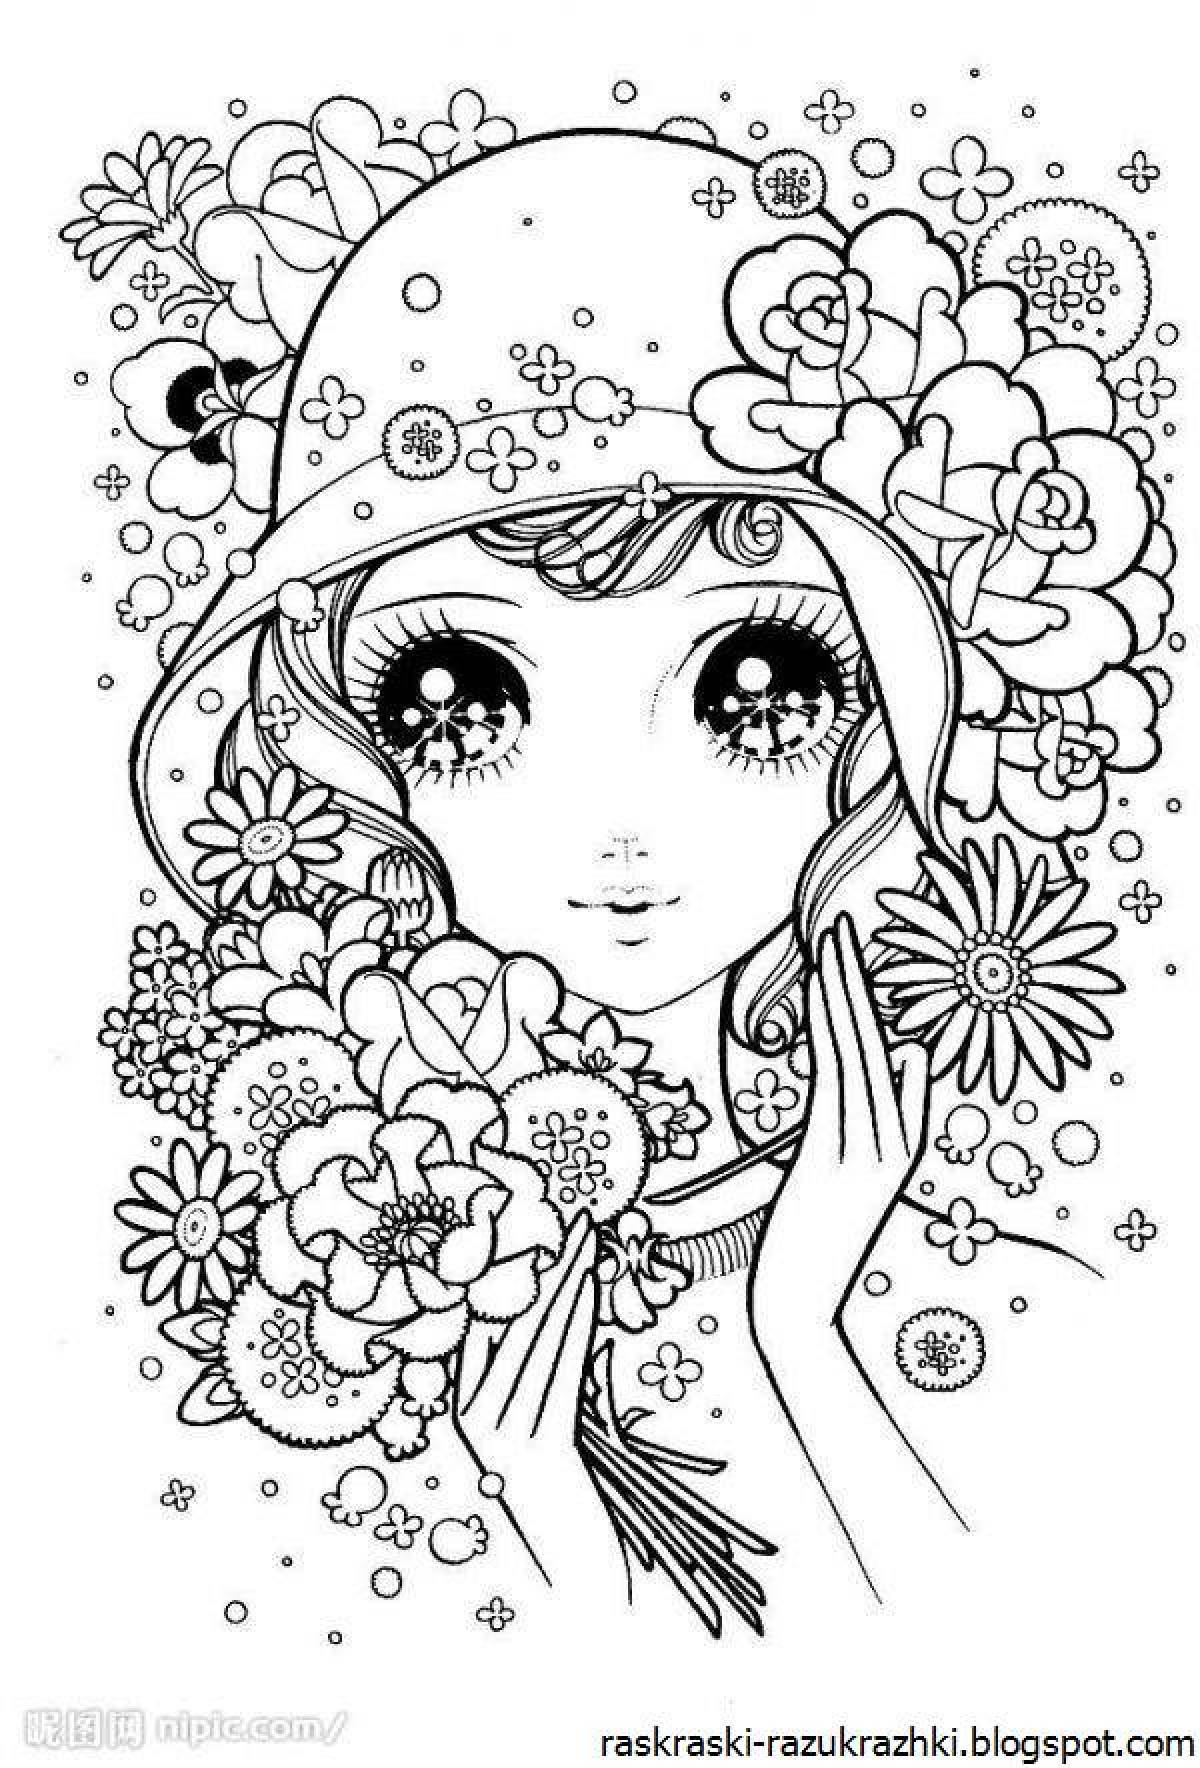 Animated coloring book for girls 9-10 years old